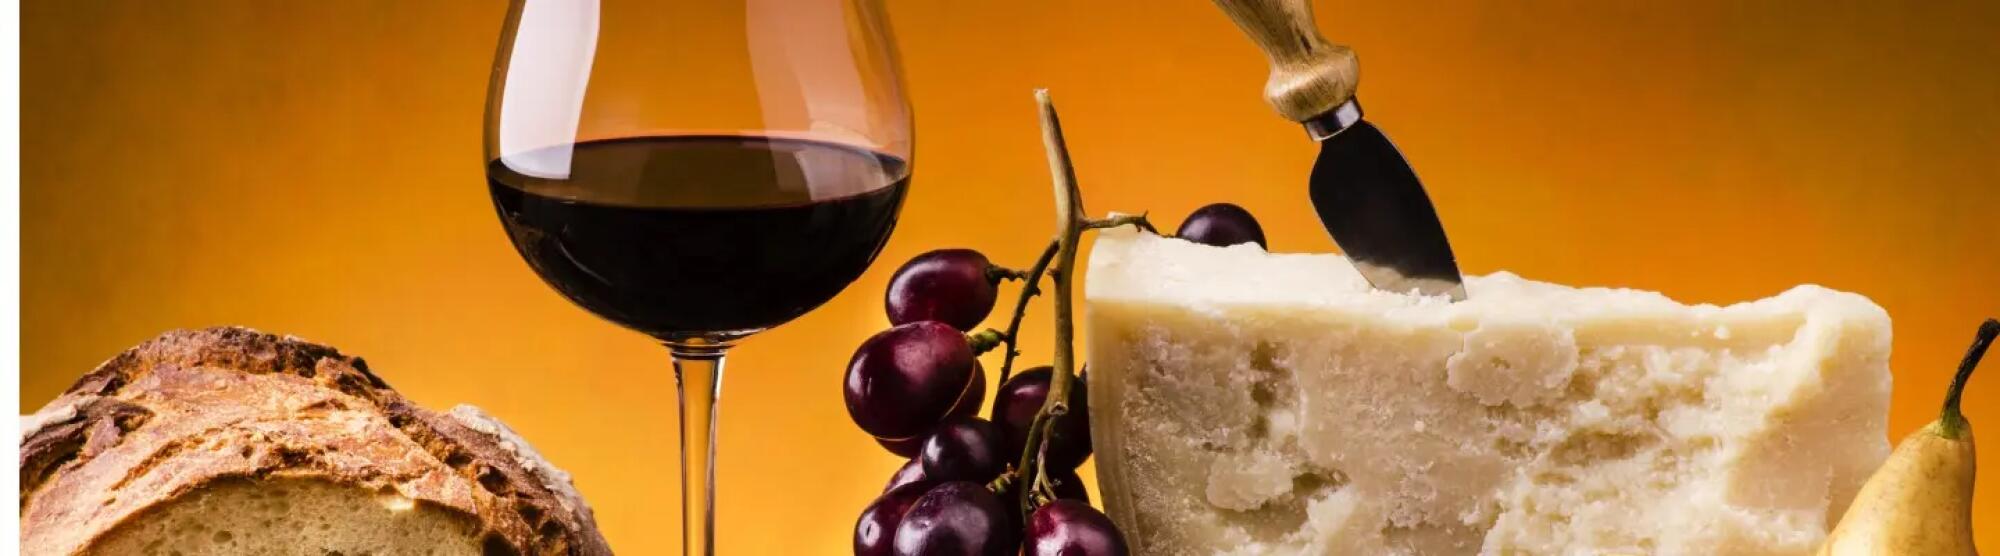 LA02_appetizing-meal-with-cheese-and-fruit-and-wine-picture-id1053963660